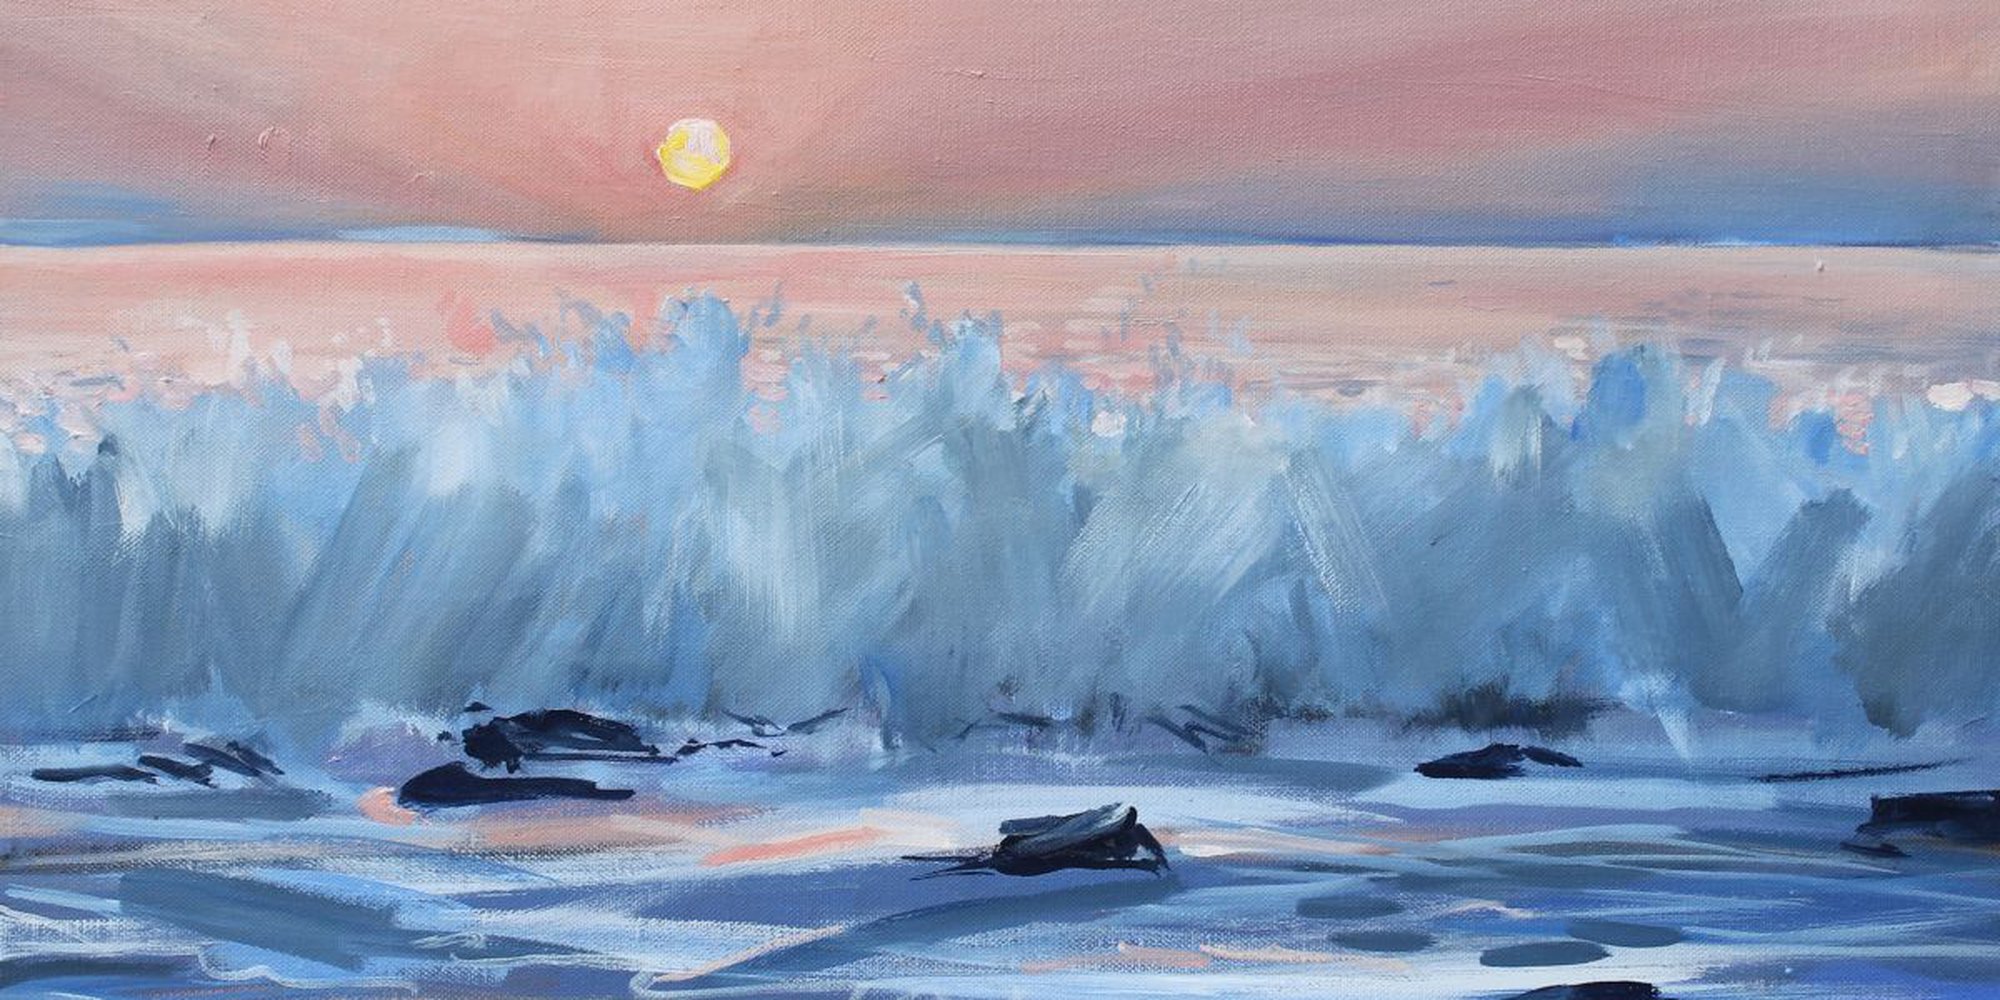 Art of the Day: "Crashing Waves (pink and blue)" by David Pott